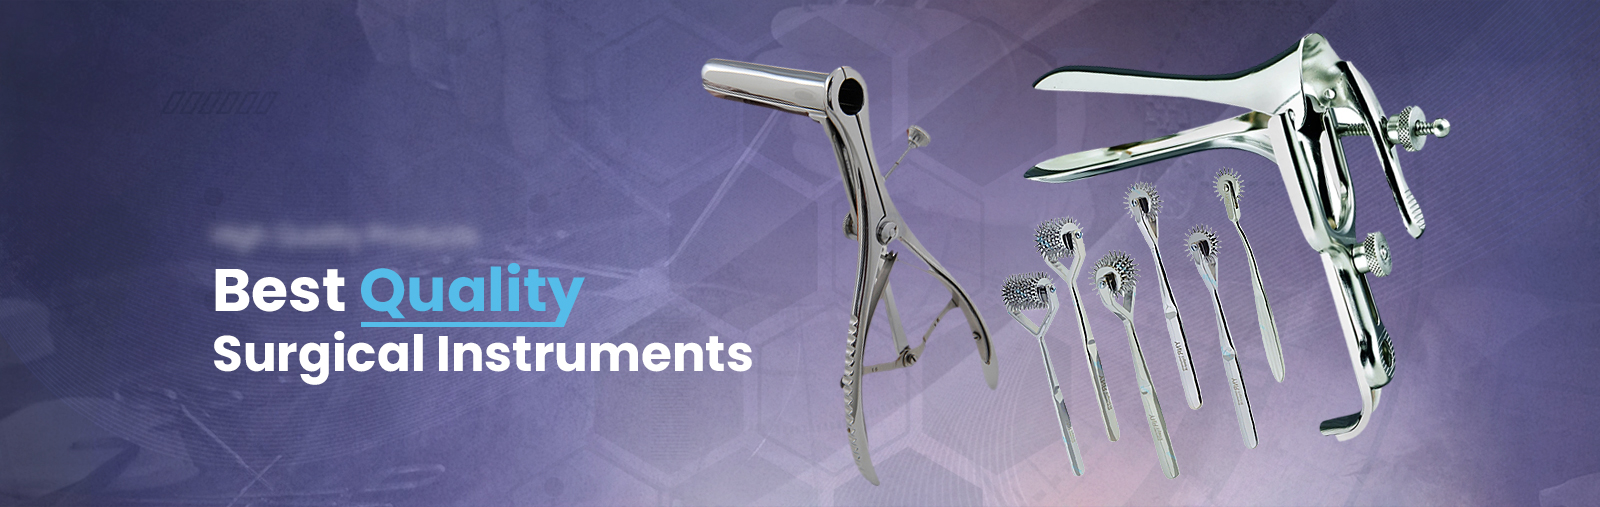 Surgical Instruments1